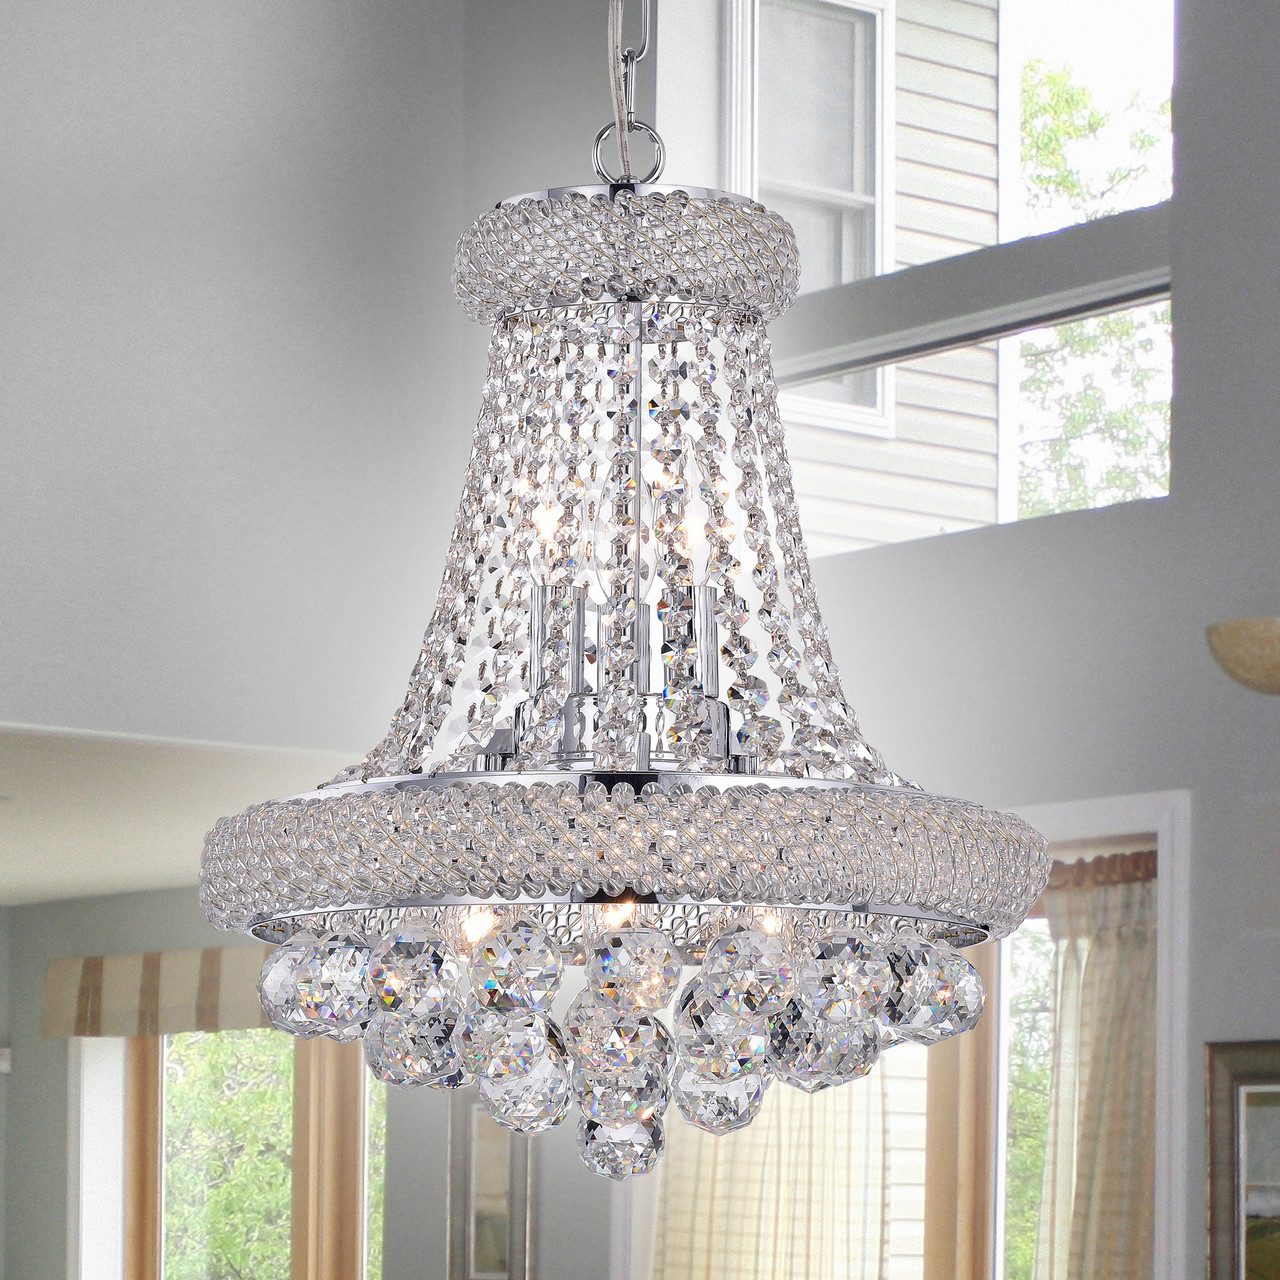 WAREHOUSE OF TIFFANY RL8144CH Isidra Chrome and Crystal 15-inch Chandelier